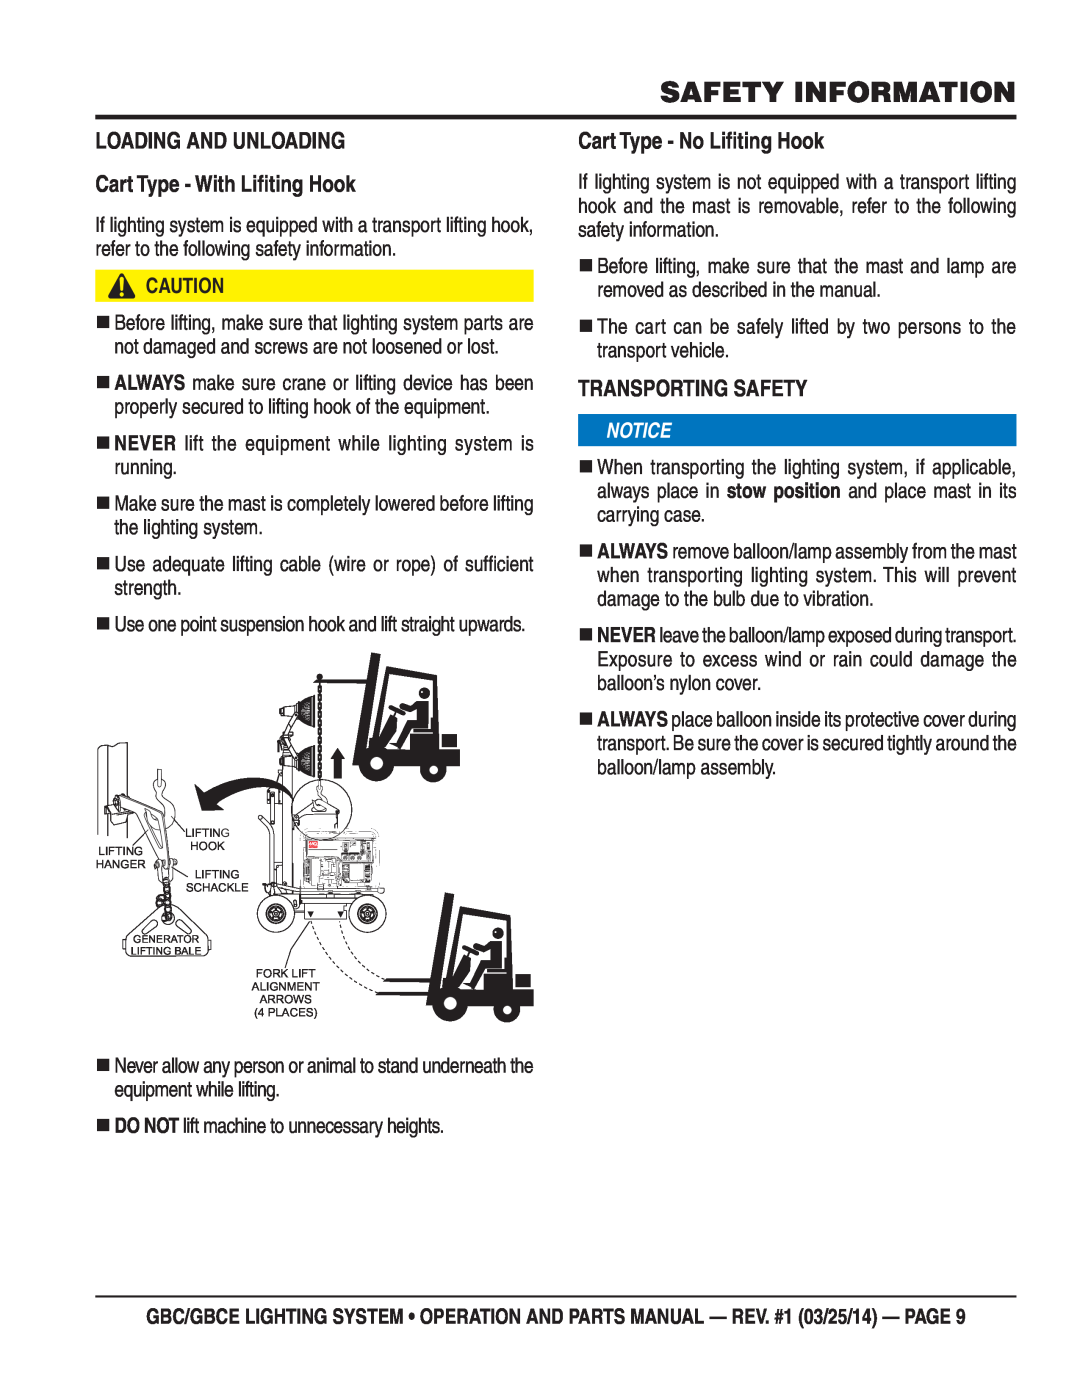 Multiquip gbe/gbce Safety Information, LOADING AND UNLOADING Cart Type - With Liﬁting Hook, Cart Type - No Liﬁting Hook 